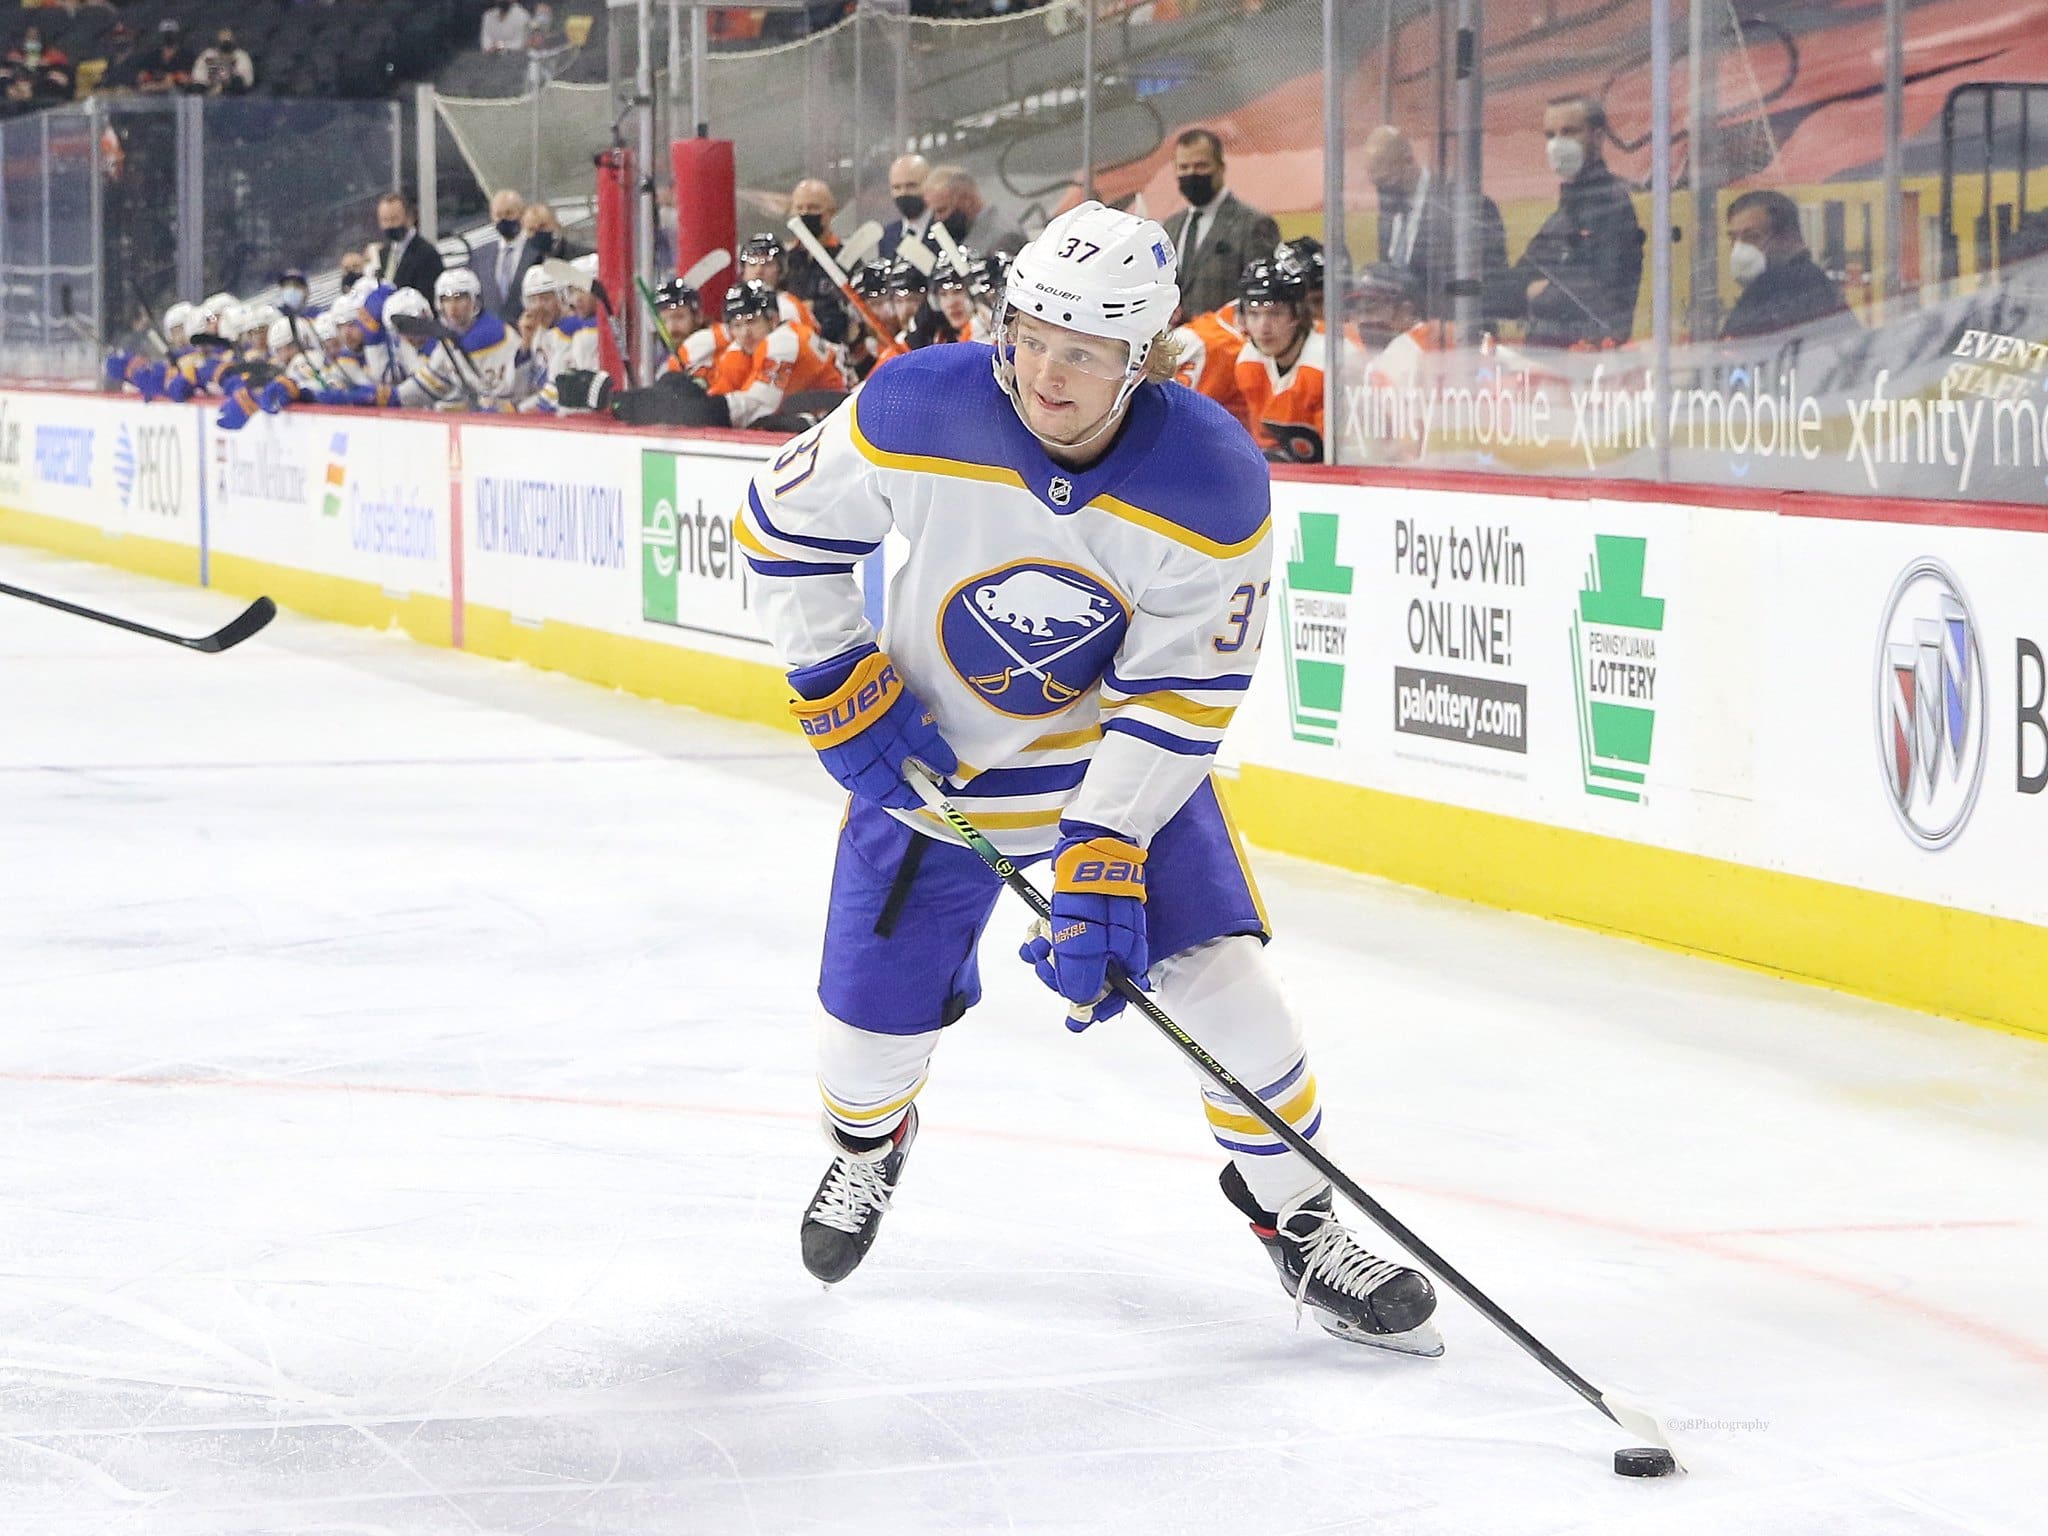 Casey Mittelstadt, now of the Colorado Avalanche (Image: Buffalo Sabres)